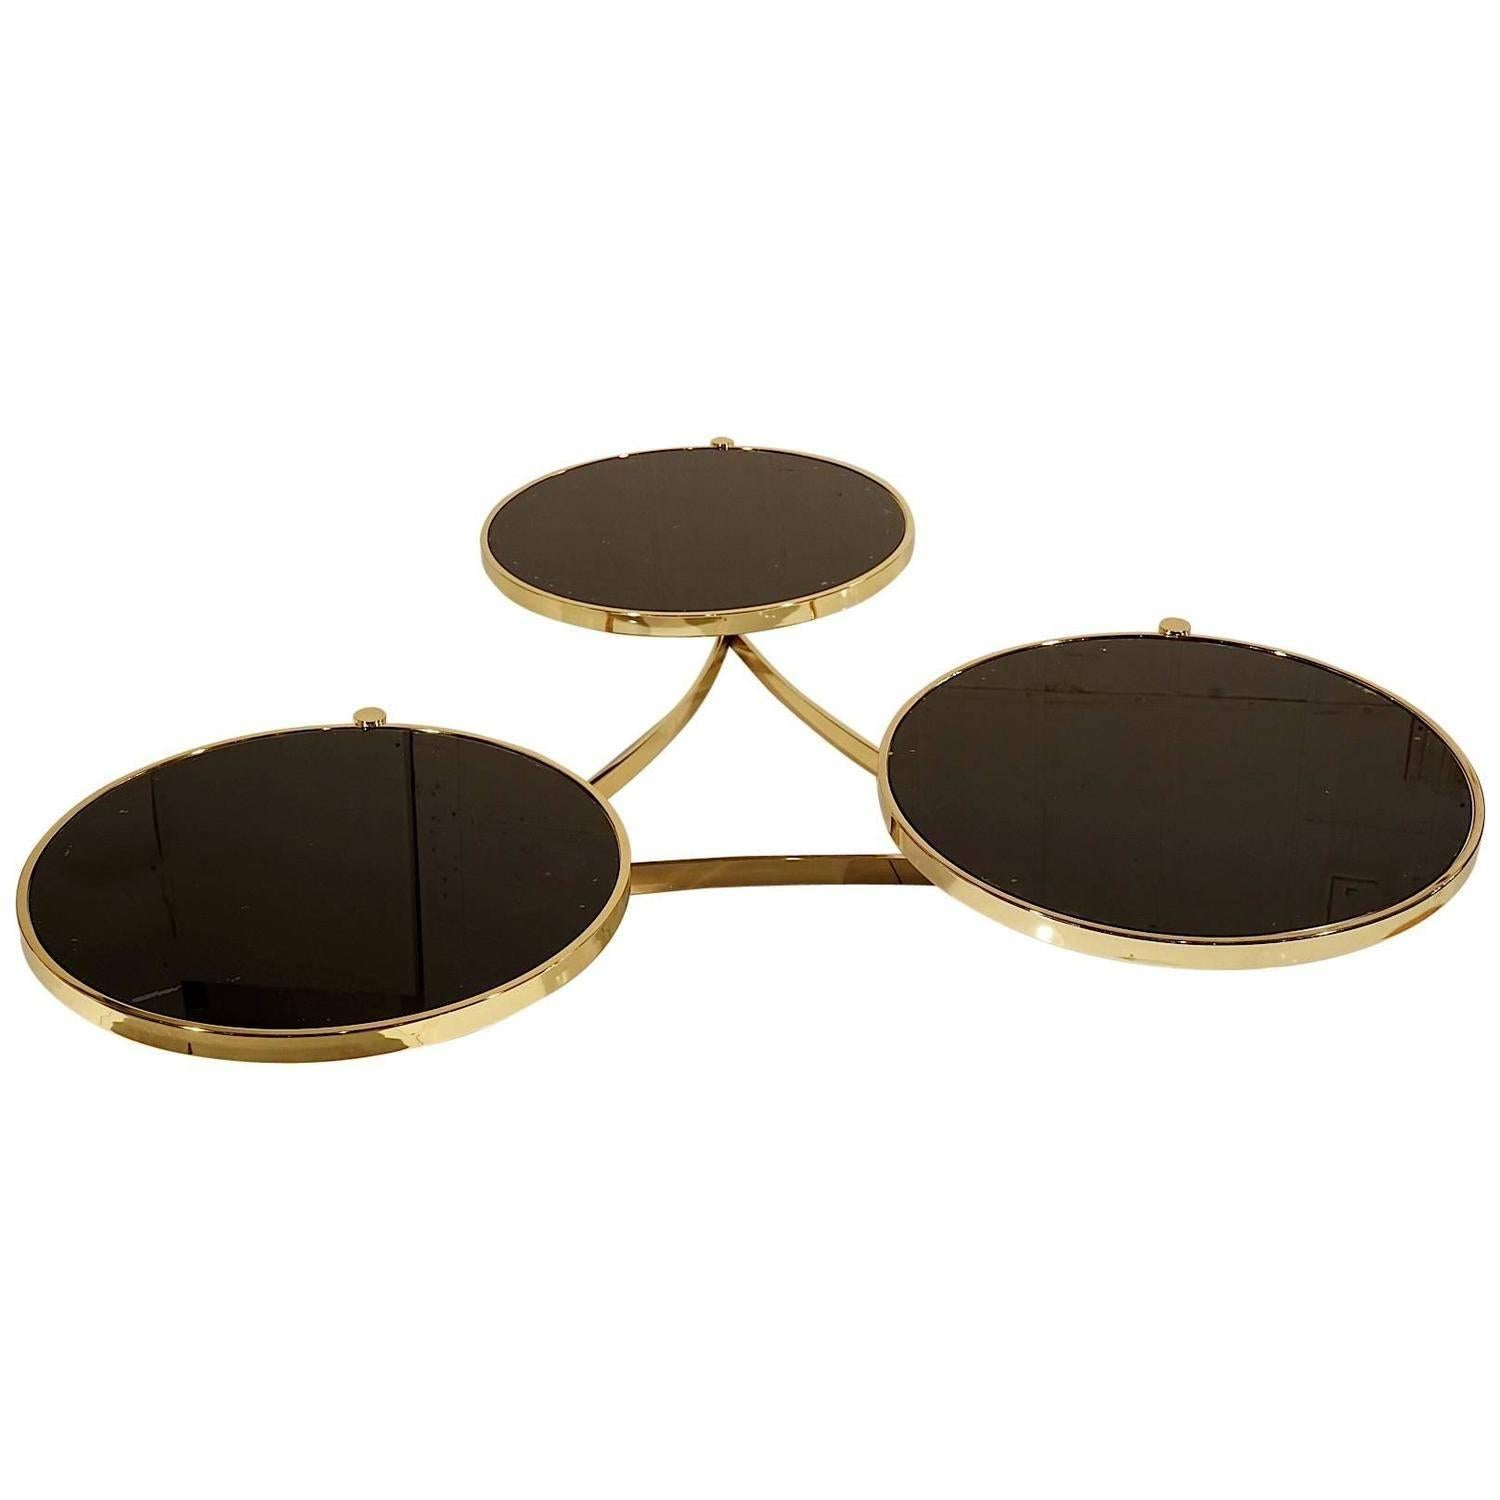 Stunning Milo Baughman Brass and Black Glass Swivel Table For Sale